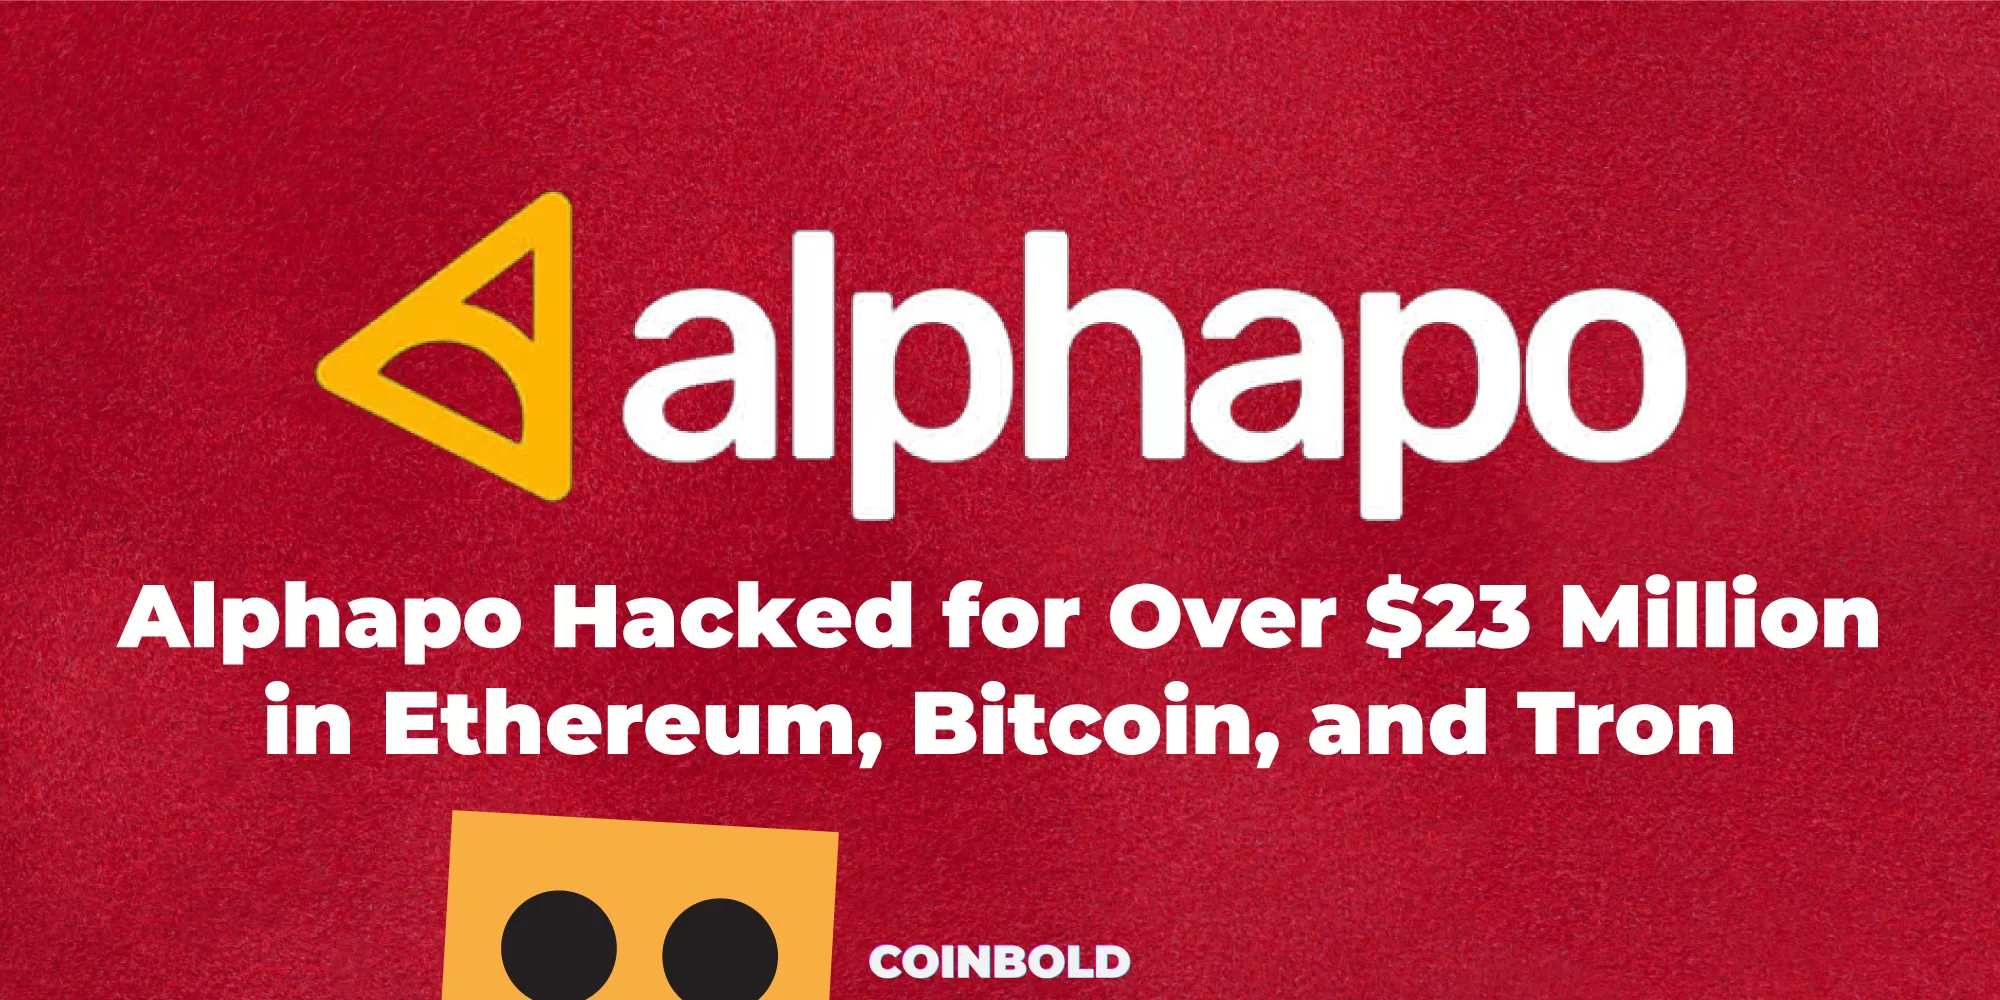 Alphapo Hacked for Over $23 Million in Ethereum, Bitcoin, and Tron